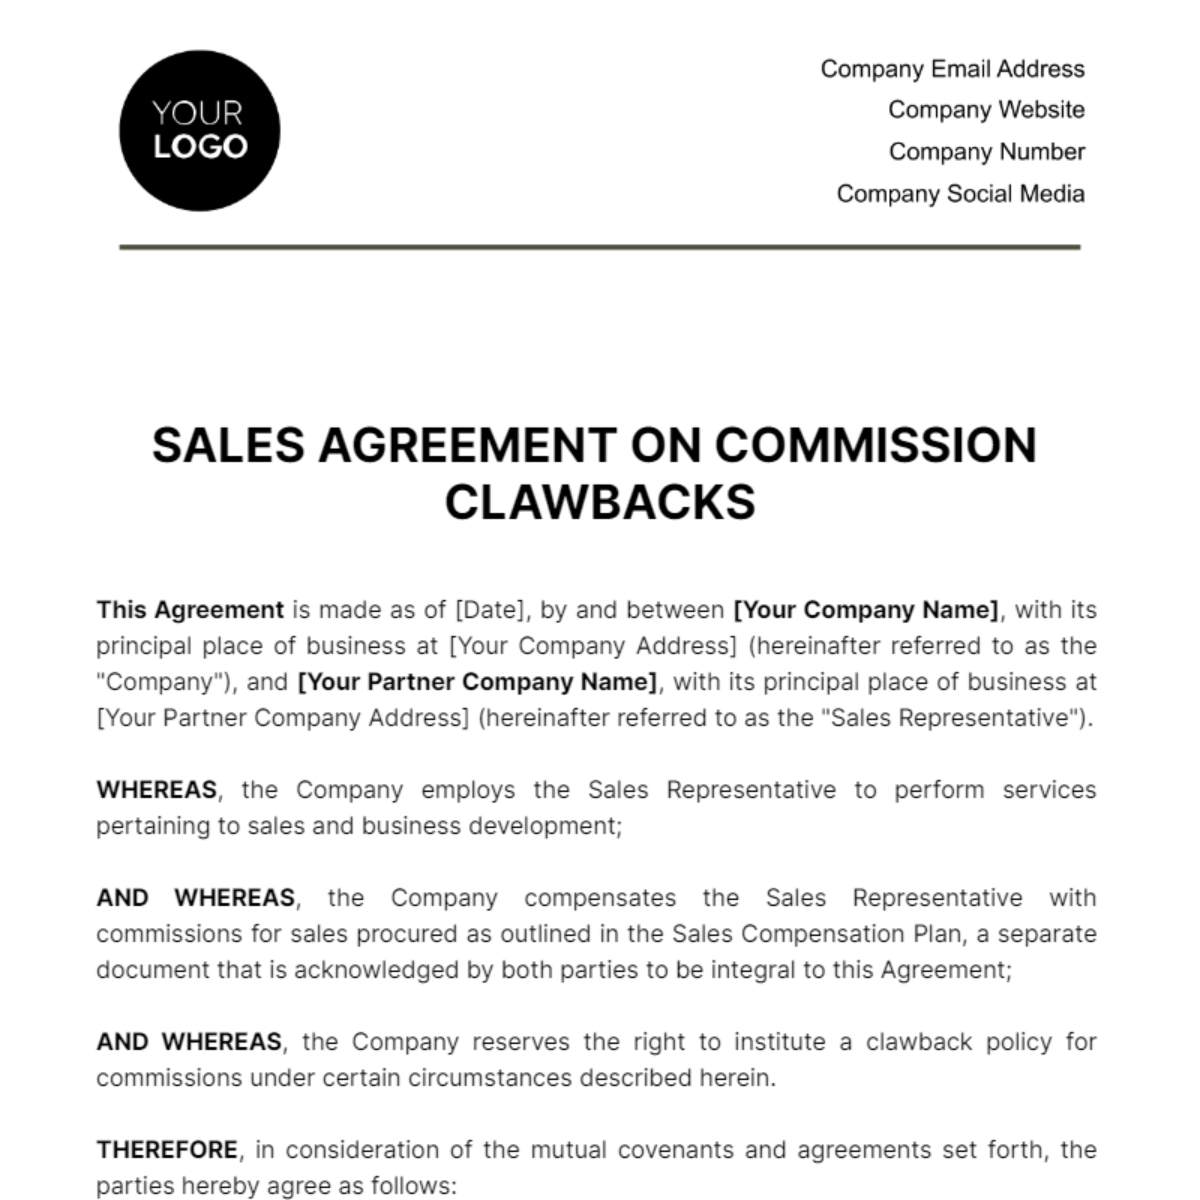 Free Sales Agreement on Commission Clawbacks Template